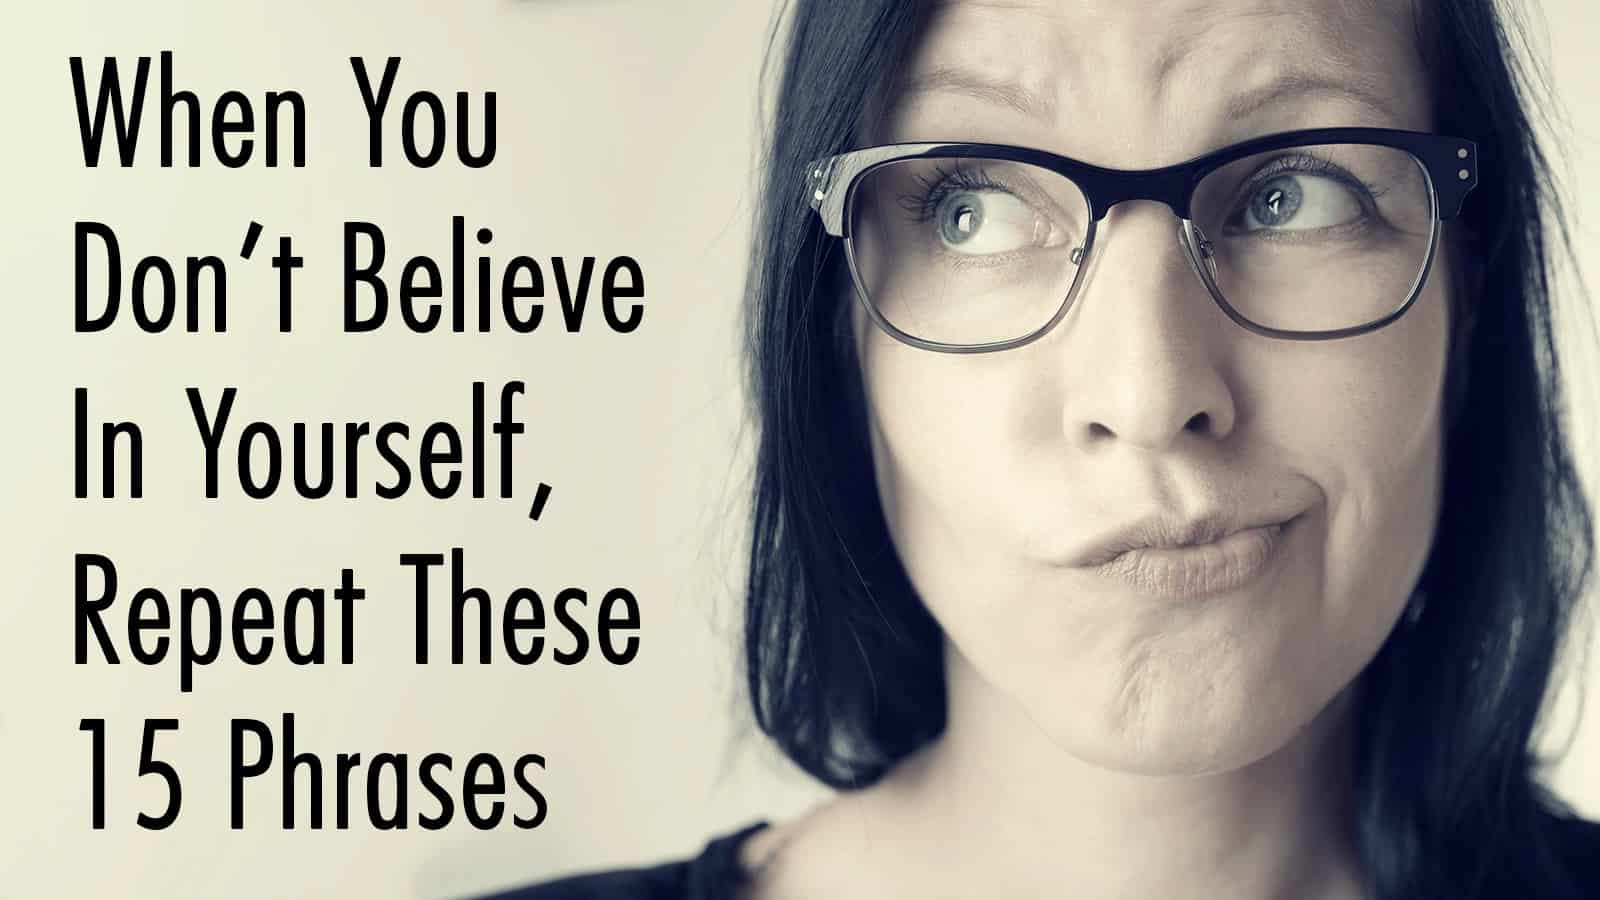 When You Don’t Believe In Yourself, Repeat These 15 Phrases